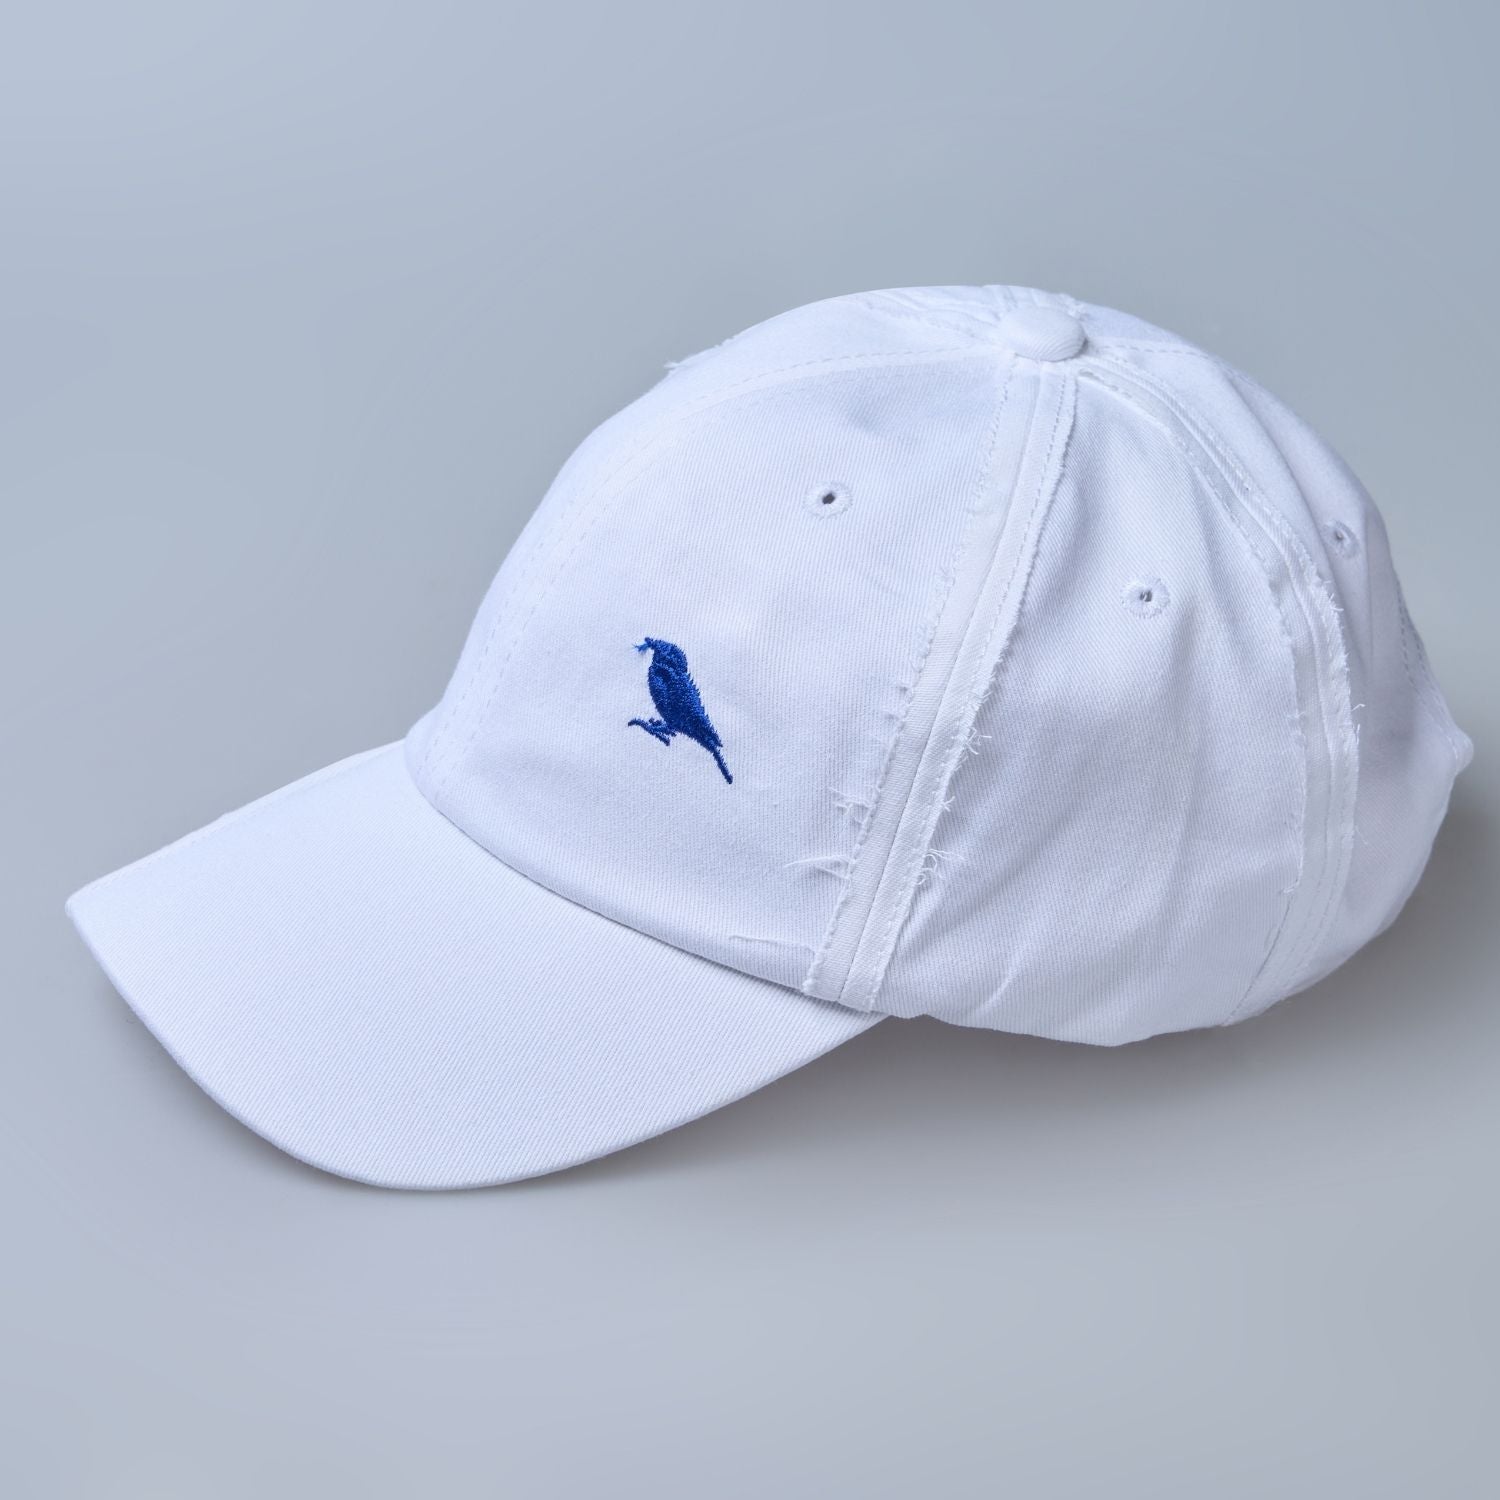 white colored, wide brim polo cap for men with adjustable strap, minimalistic side view.